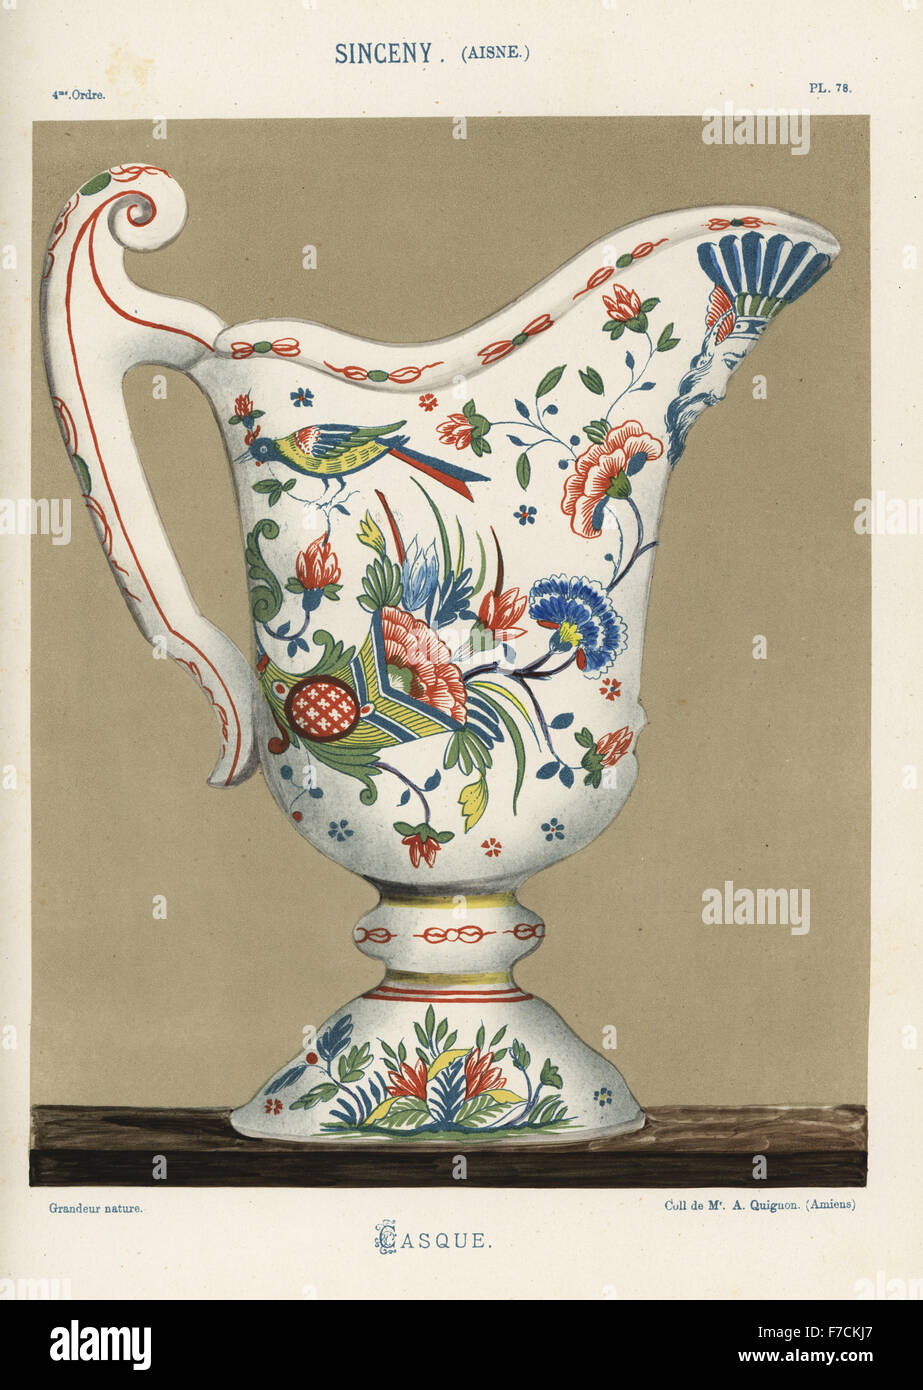 Casque or helmet pitcher from Sinceny, France, 18th century, Oriental birds and flowers and man's head at the spout. Hand-finished chromolithograph from Ris Paquot's General History of Ancient French and Foreign Glazed Pottery, Chez l'Auteur, Paris, 1874. Stock Photo